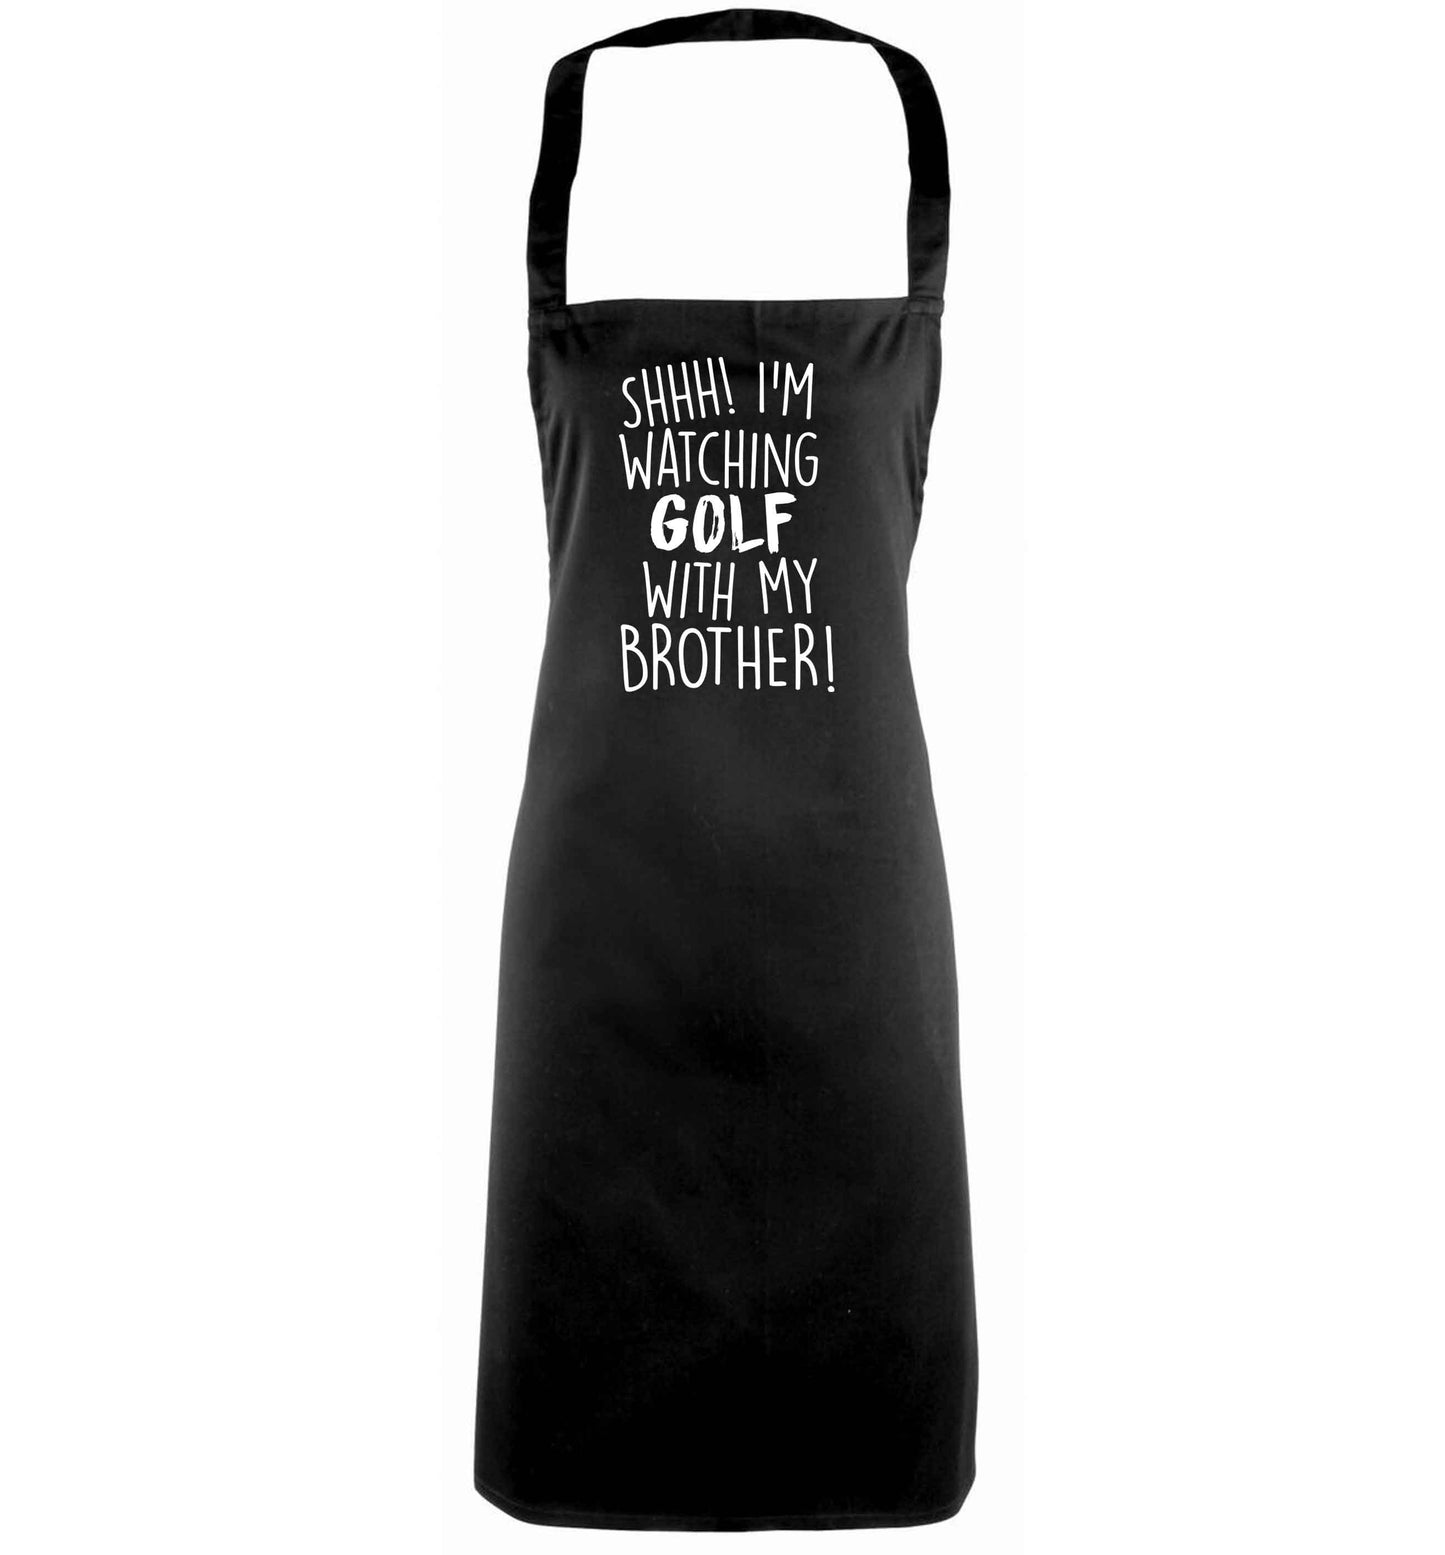 Shh I'm watching golf with my brother black apron